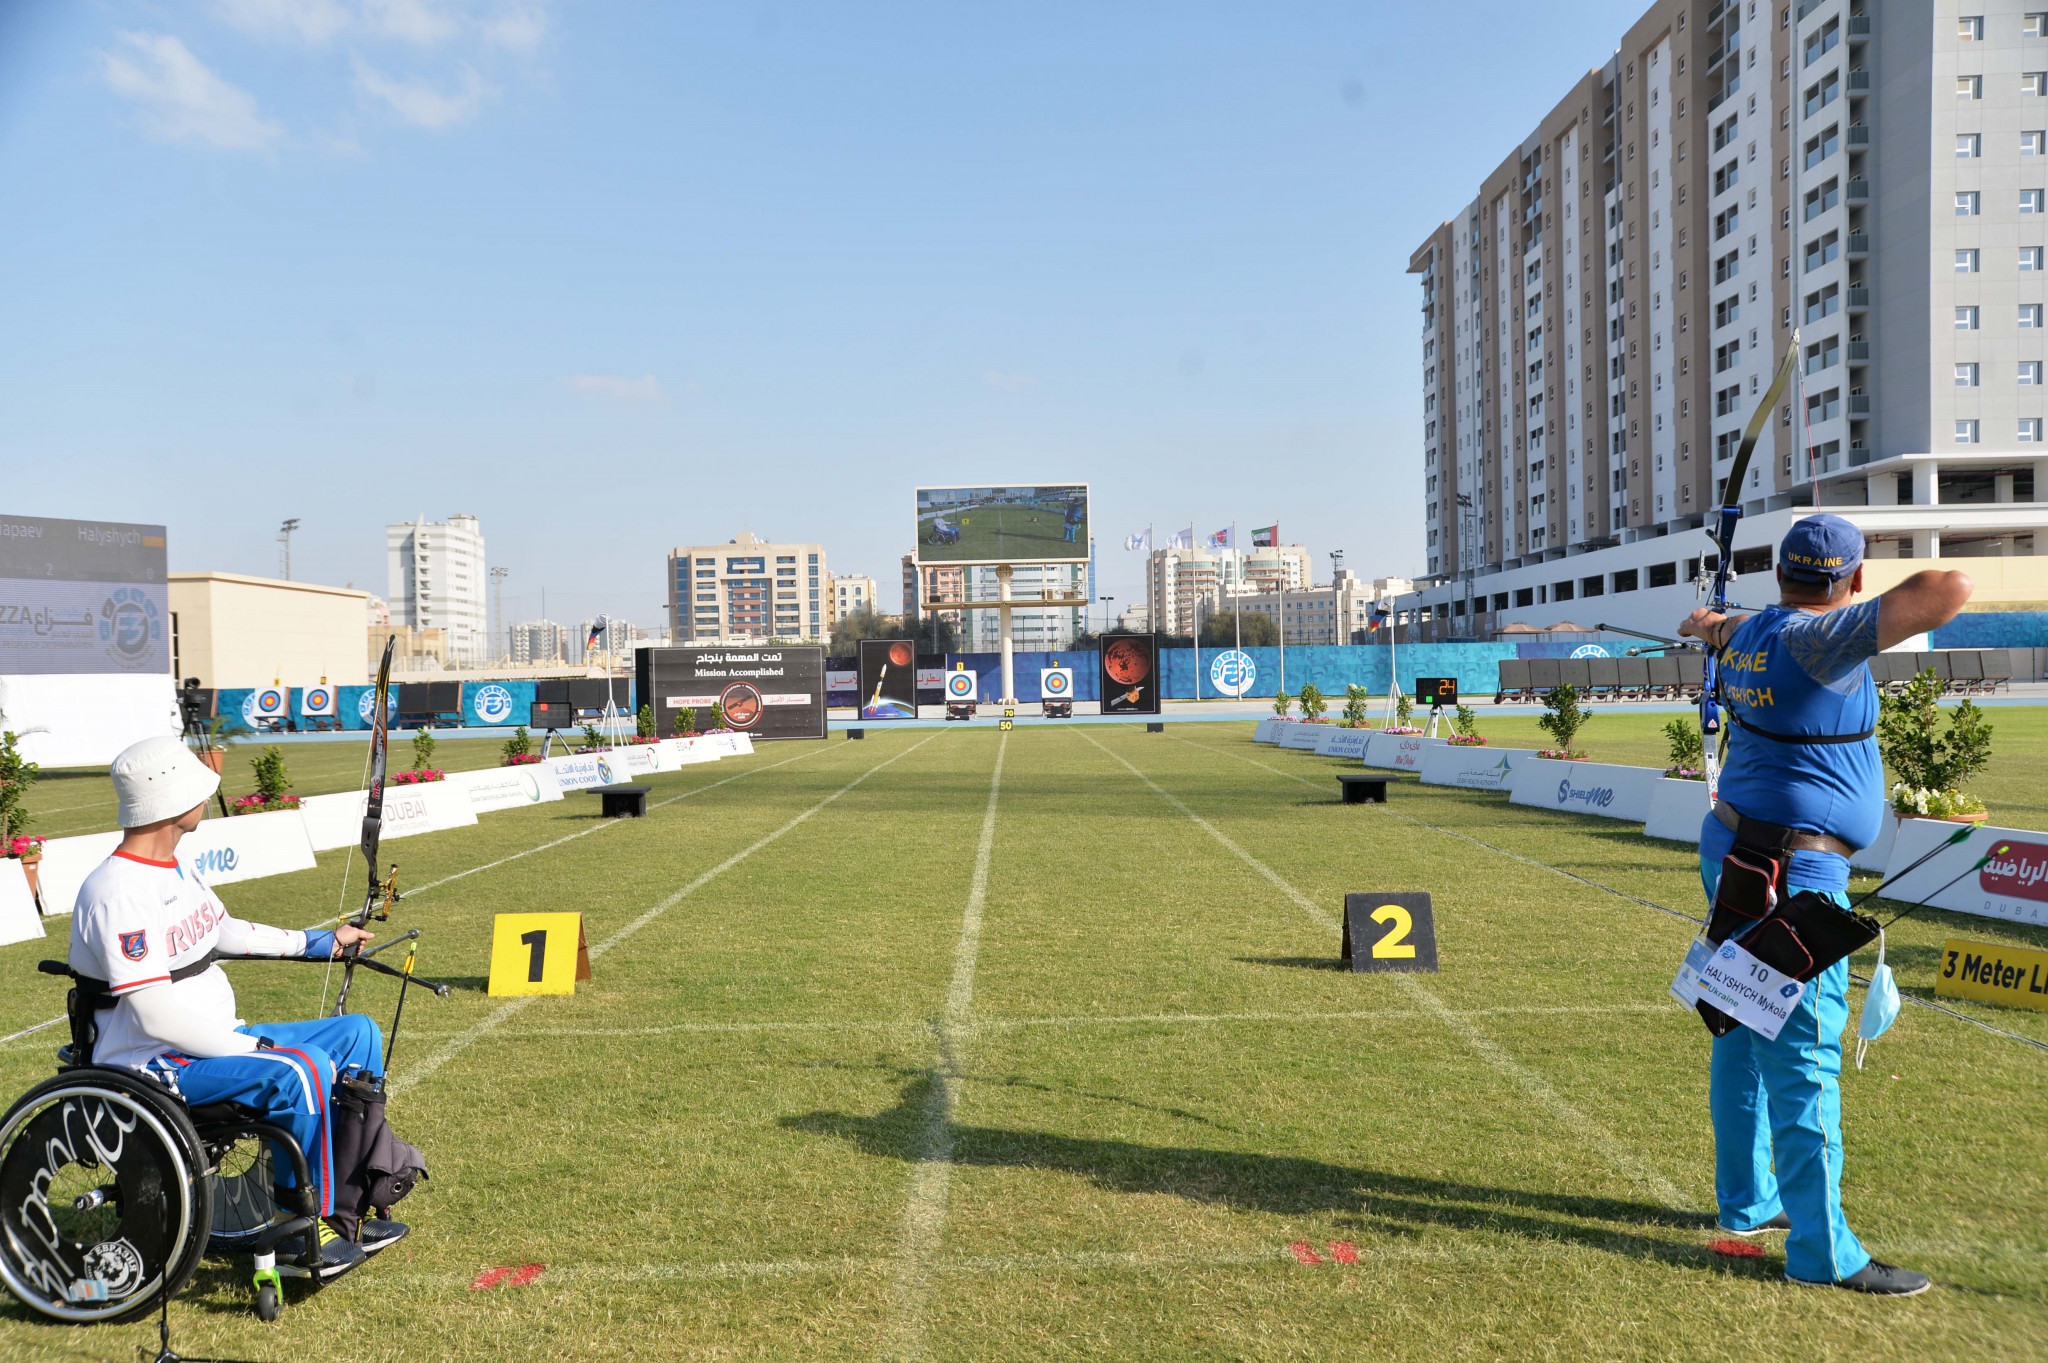 World Archery Para Championships organisers anticipating "great event"